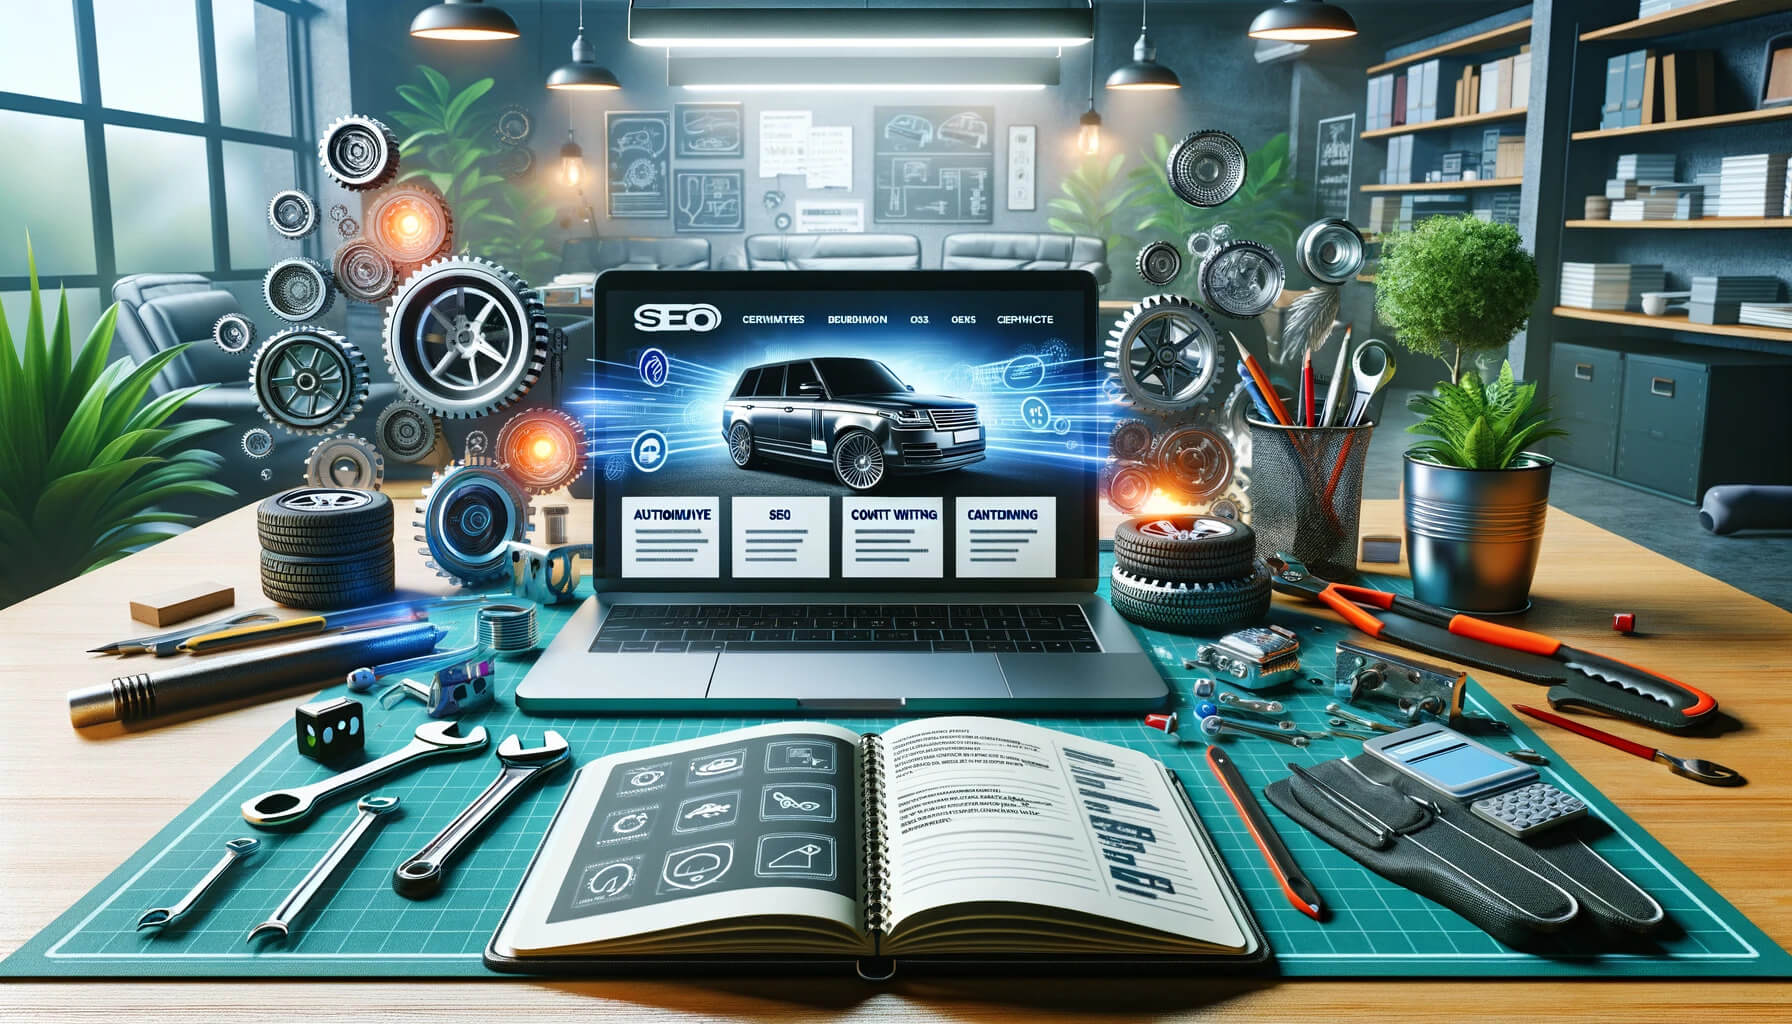 Variety of professional services for automotive businesses at Anar.Parts, including web development and SEO content creation